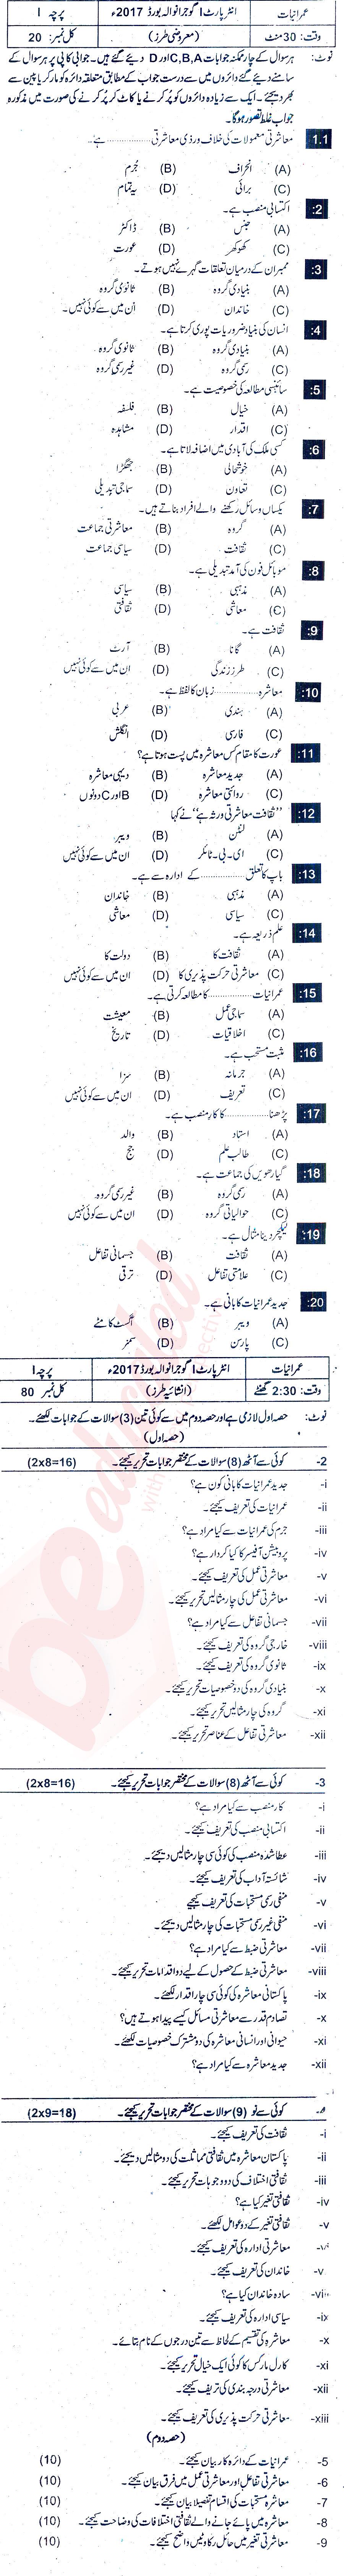 Sociology FA Part 1 Past Paper Group 1 BISE Gujranwala 2017